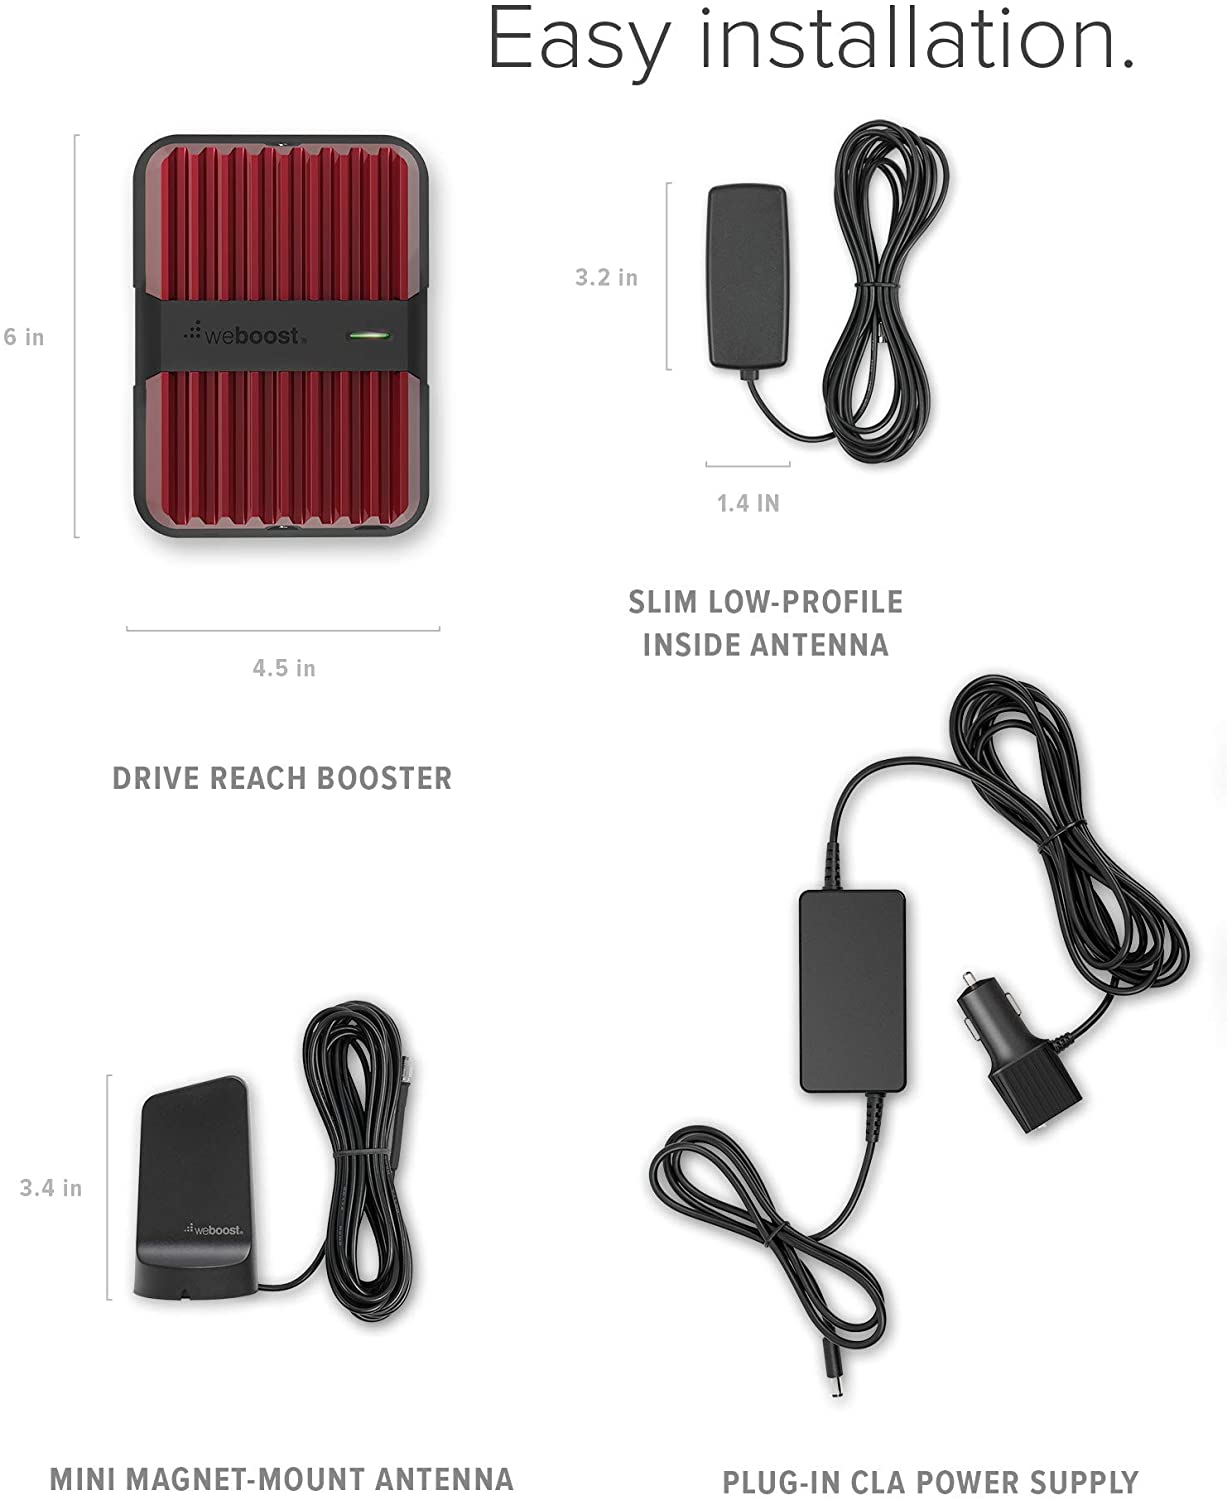 weBoost Drive Reach (650154) Cell Phone Signal Booster for Your Car, Truck, Van, or SUV -Bell, Rogers, Telus - Enhance Your Cell Phone Signal